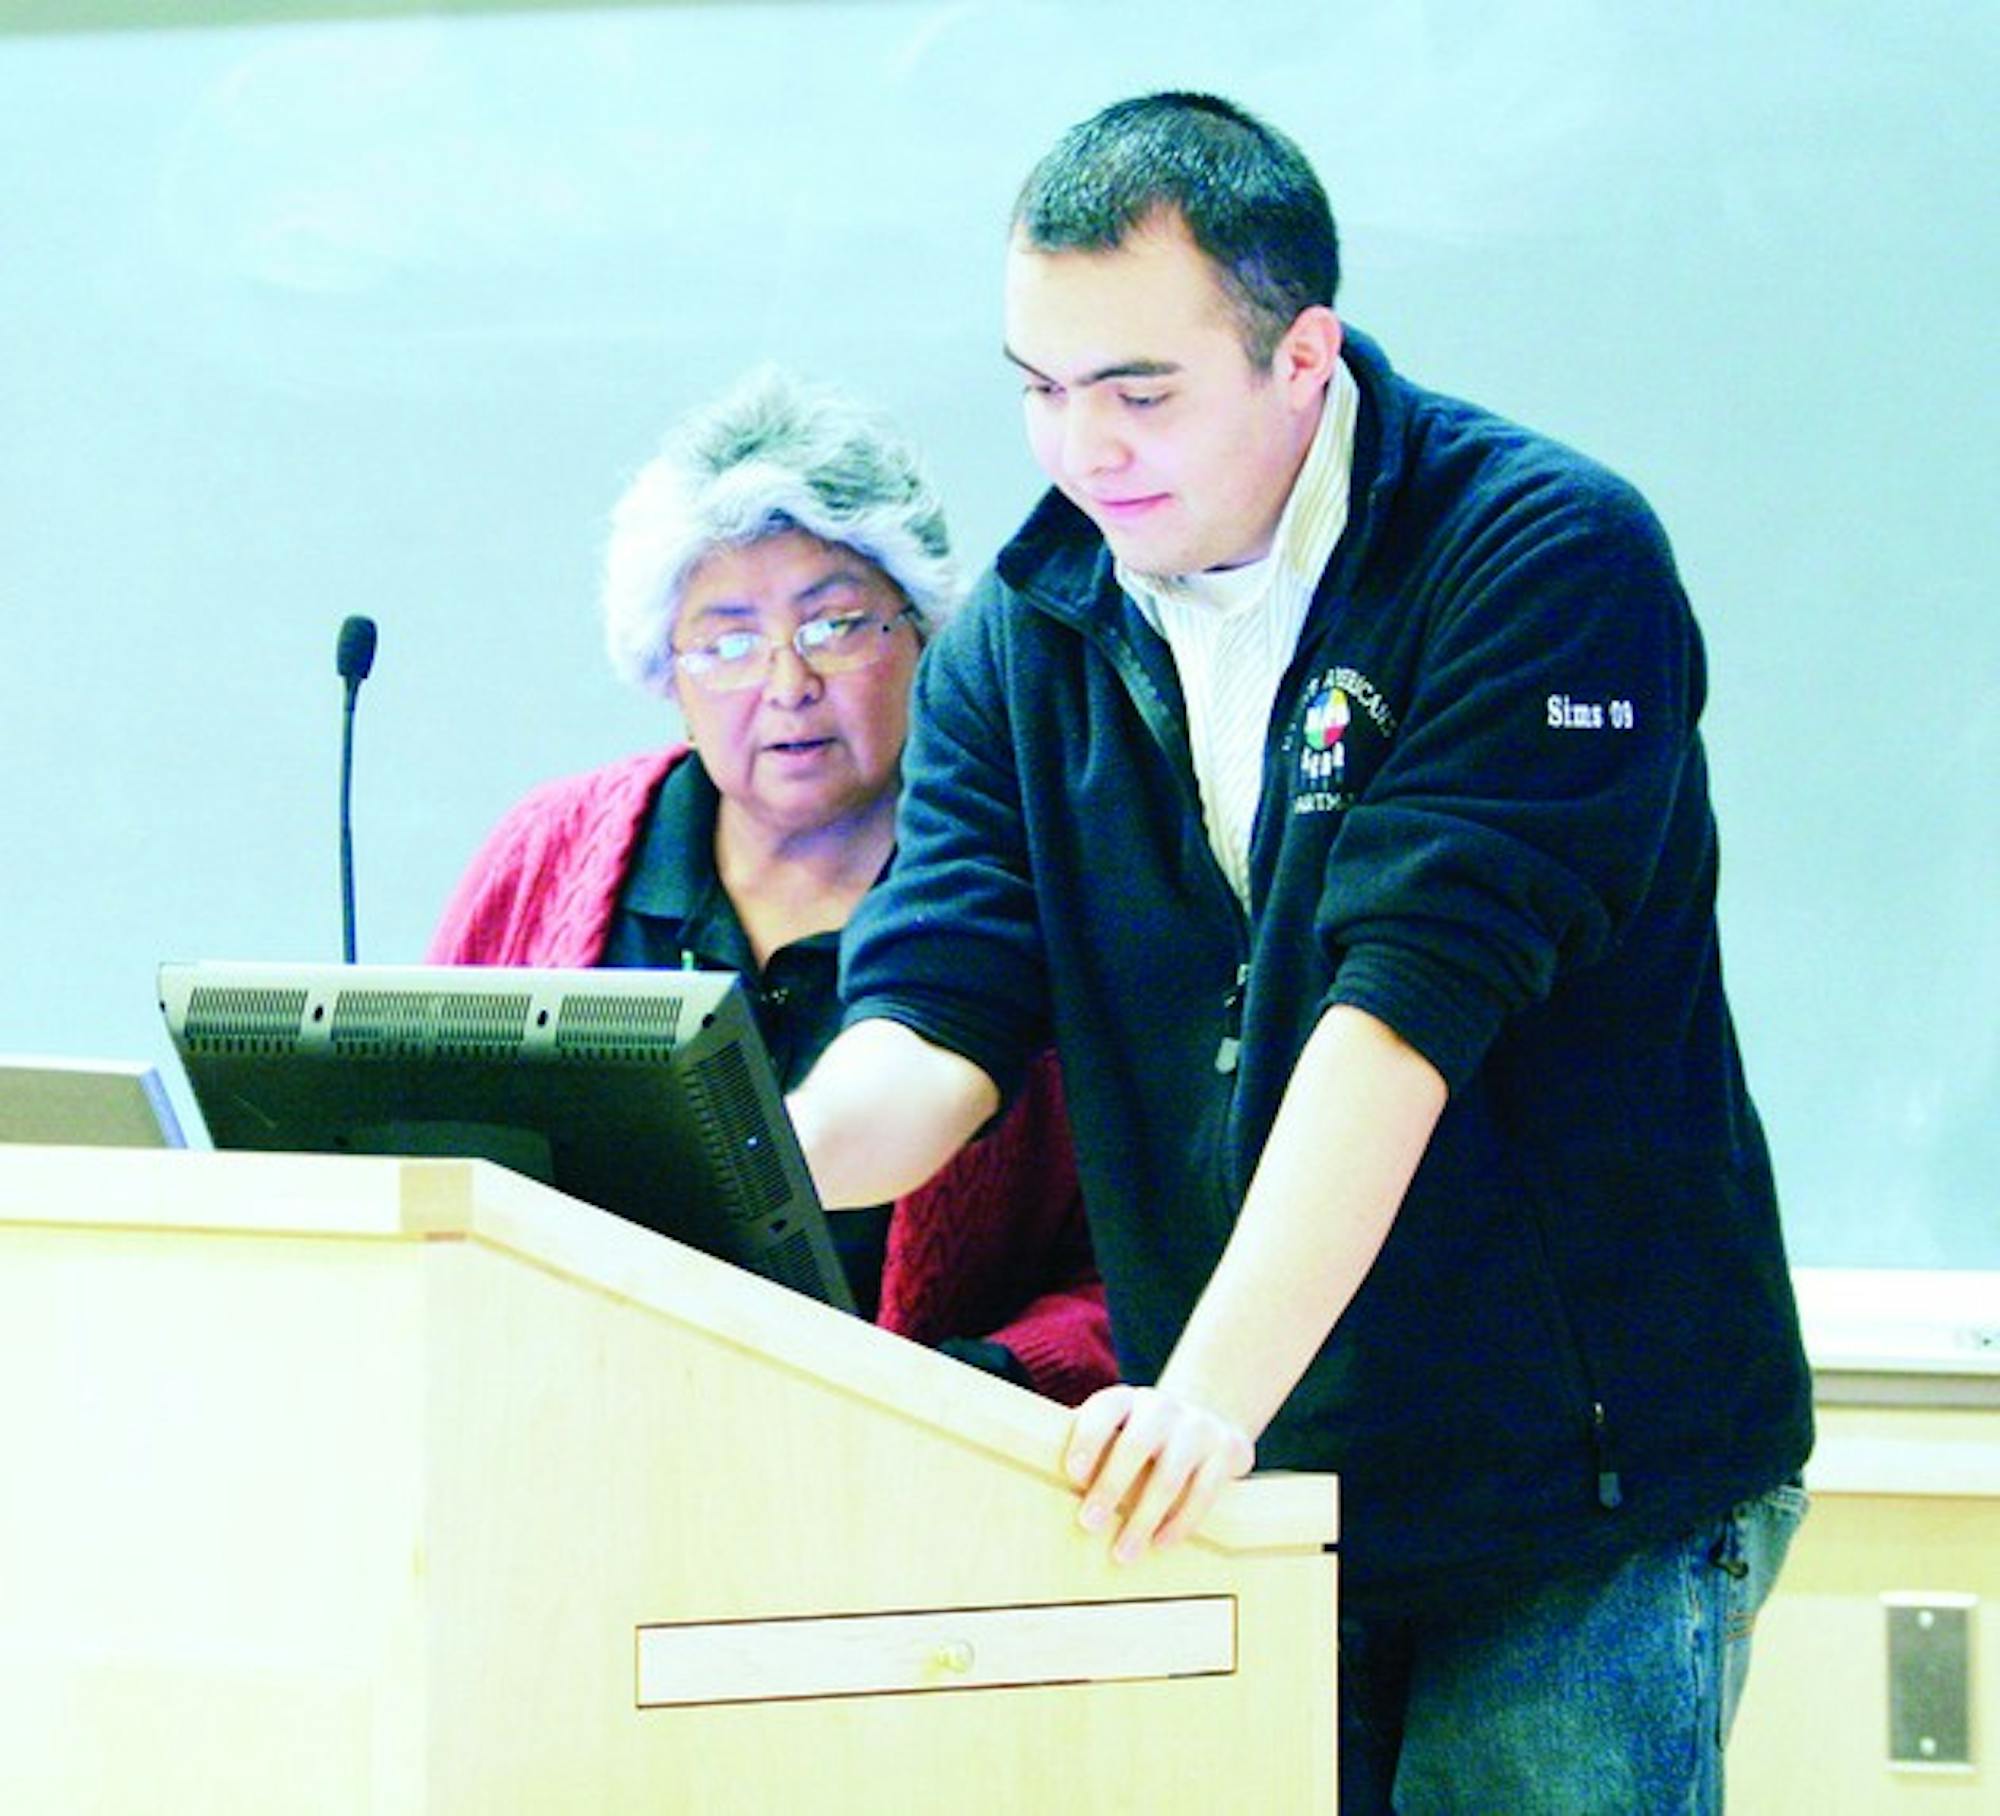 Aaron Sims \'09 assists his mother, University of New Mexico professor Christine Sims, during her Tuesday speech at First Nations week.